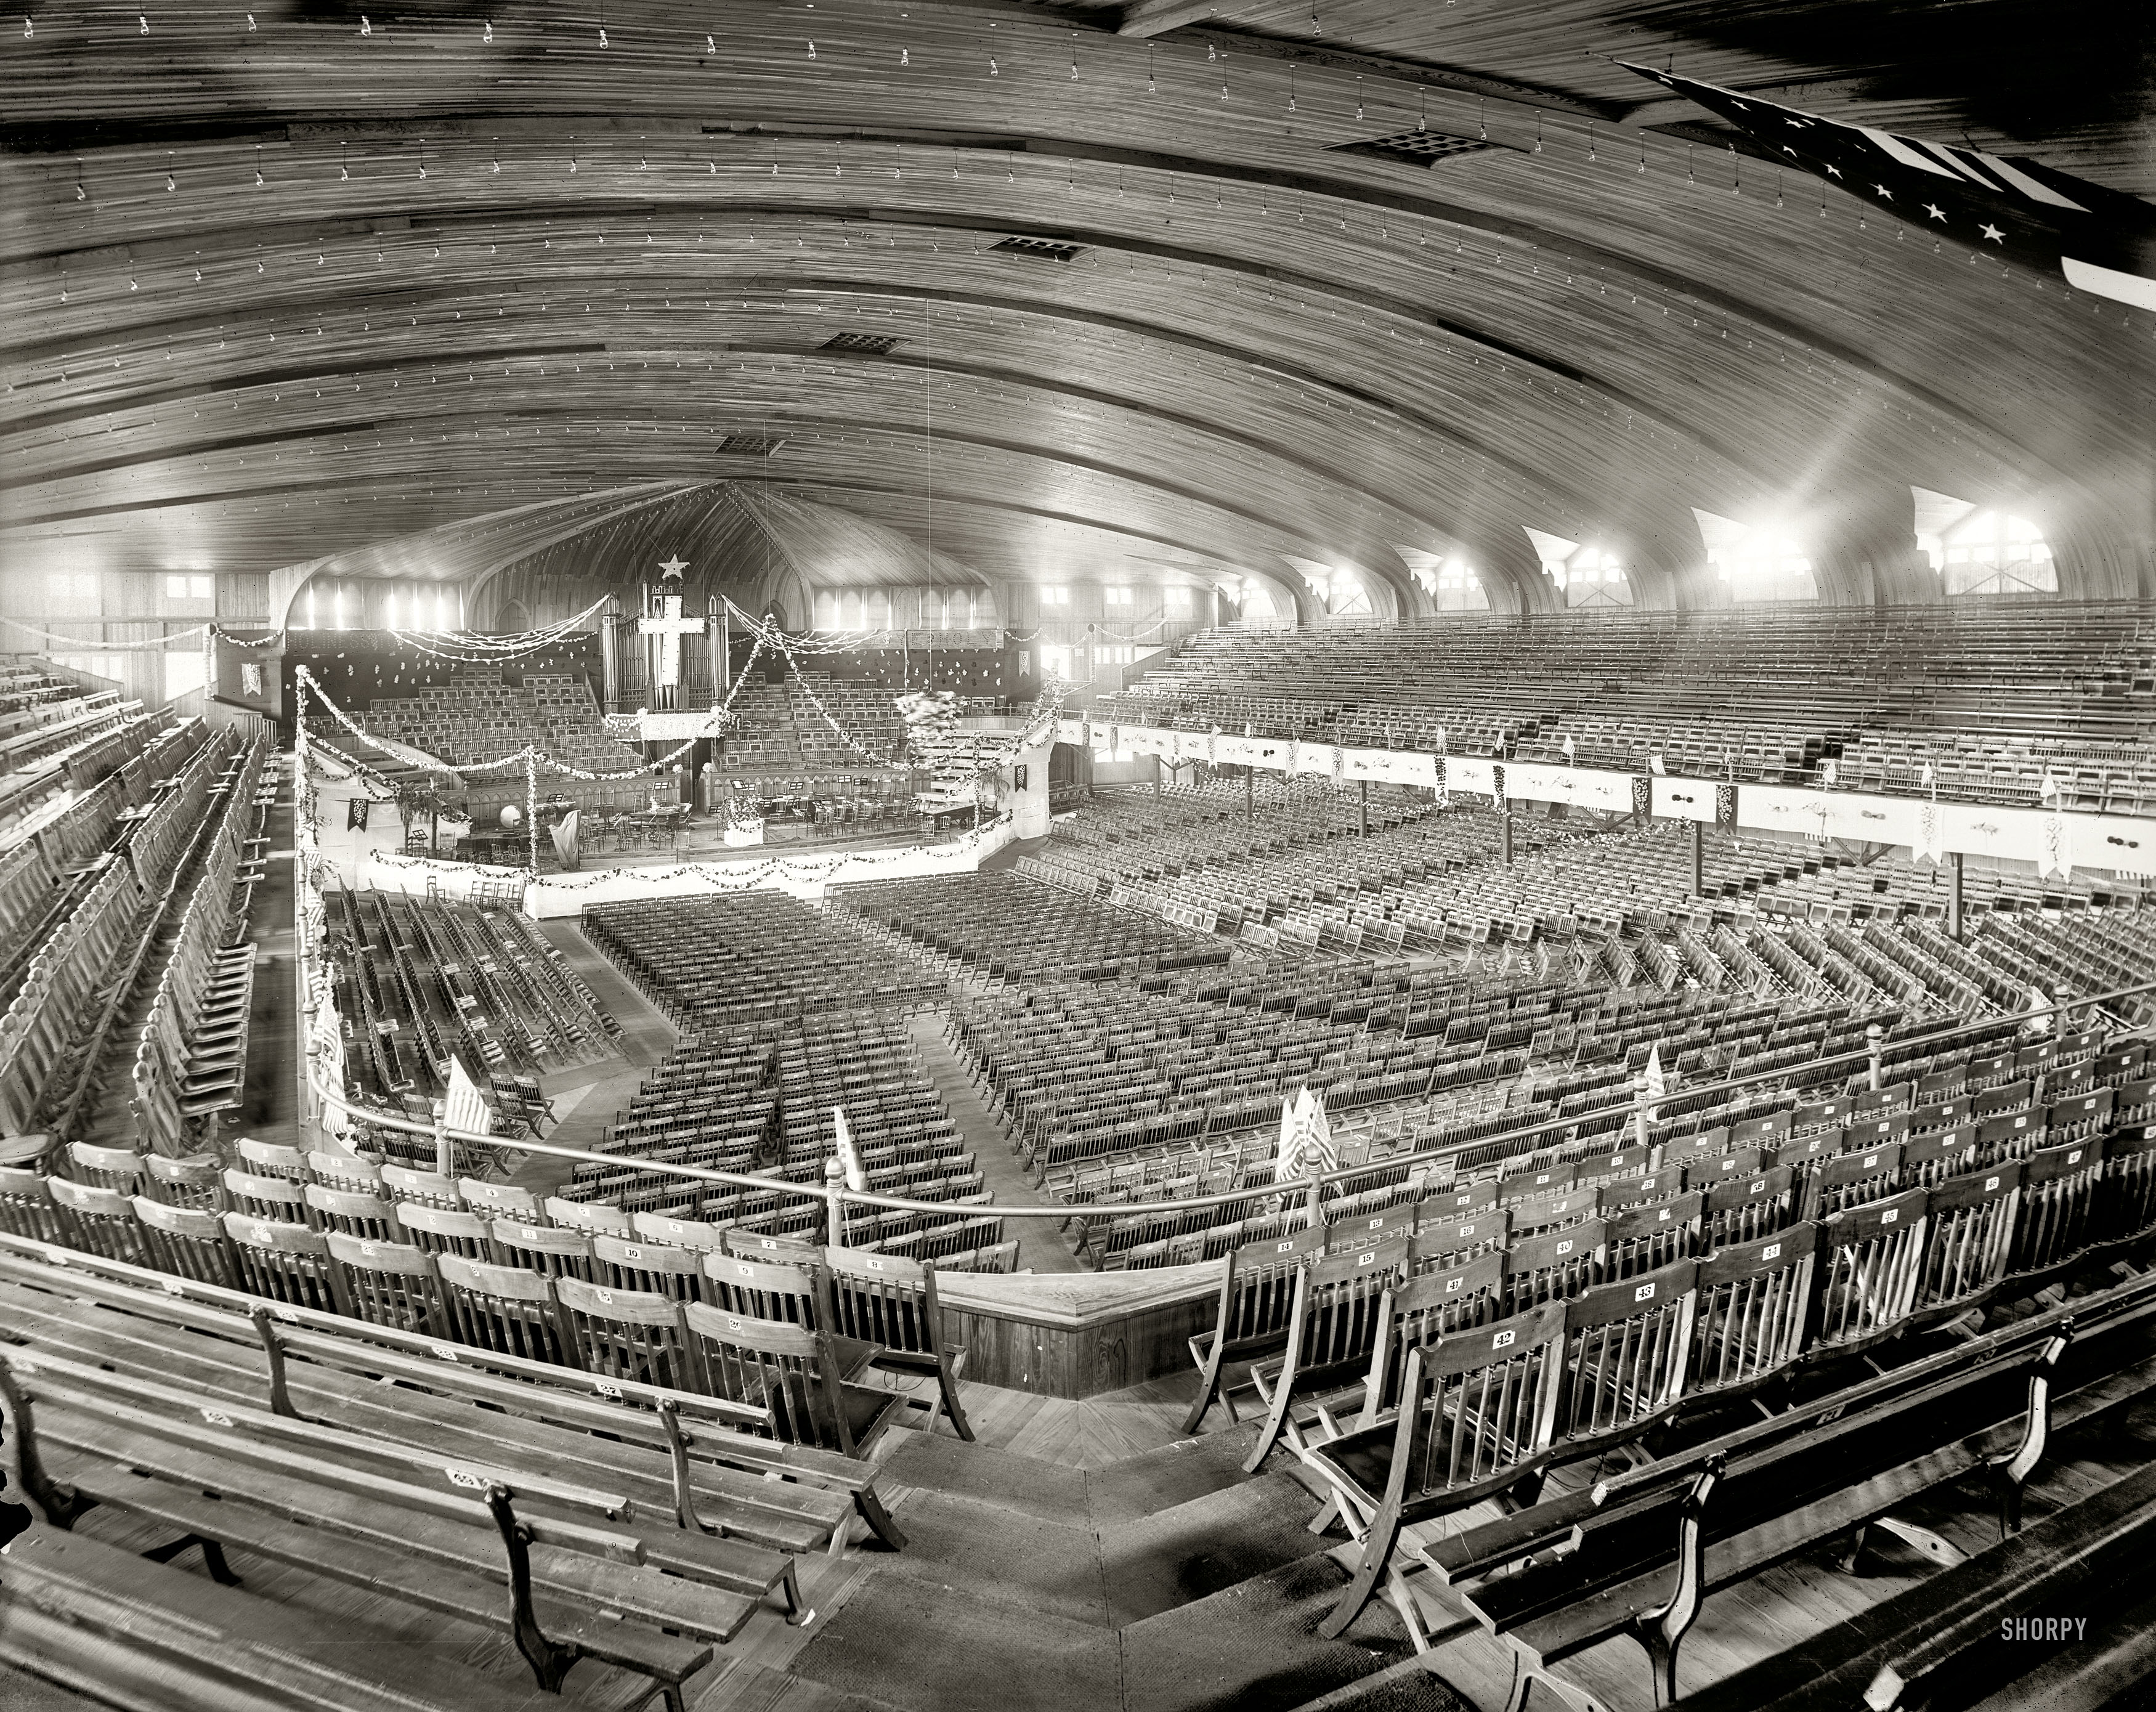 Ocean Grove, New Jersey, circa 1900-1910. "Interior of auditorium." 8x10 inch dry plate glass negative, Detroit Publishing Company. View full size.